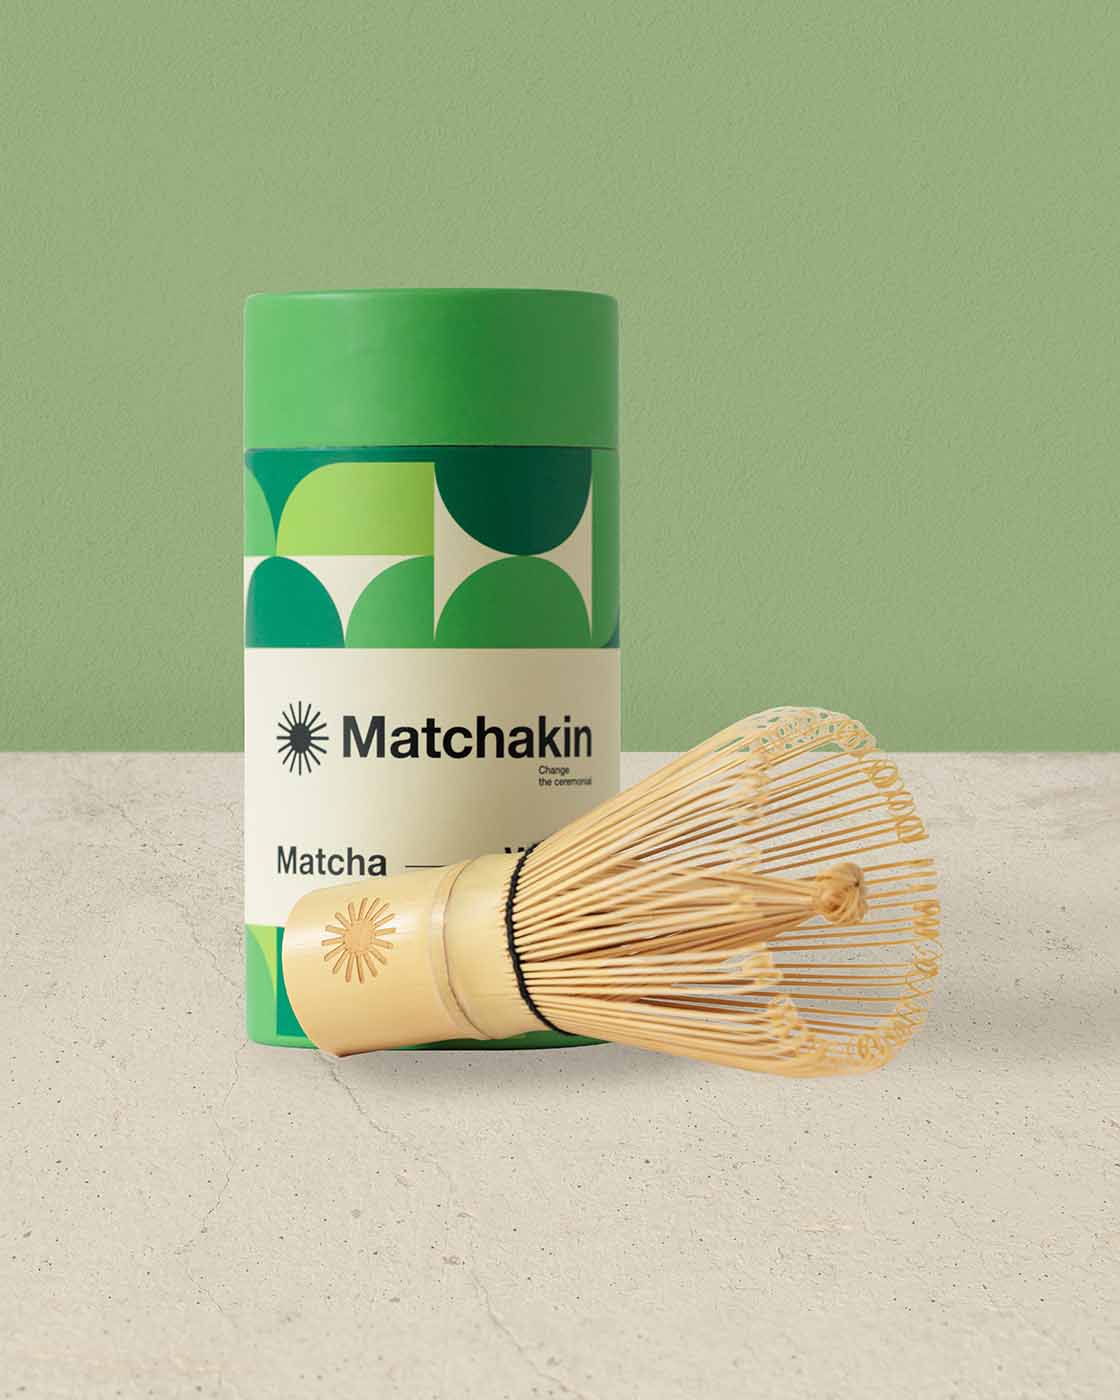 Original Chasen bamboo whisk with 100 prongs for preparing matcha. Logo Matchakin engraved and eco sustainable package